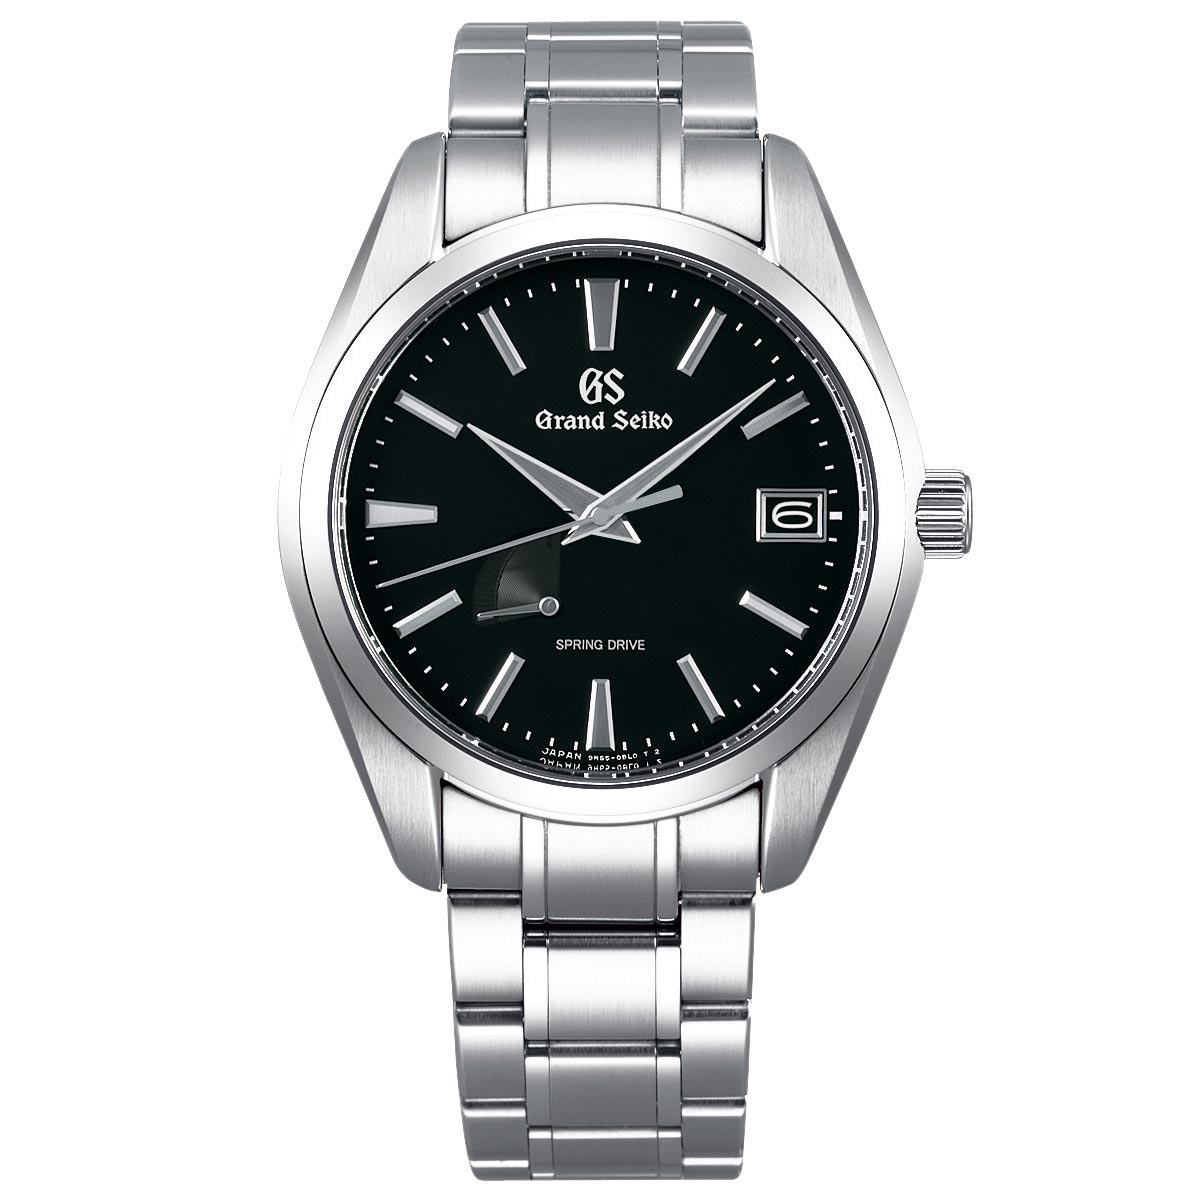 Grand Seiko Heritage Collection Spring Drive 41mm Watch